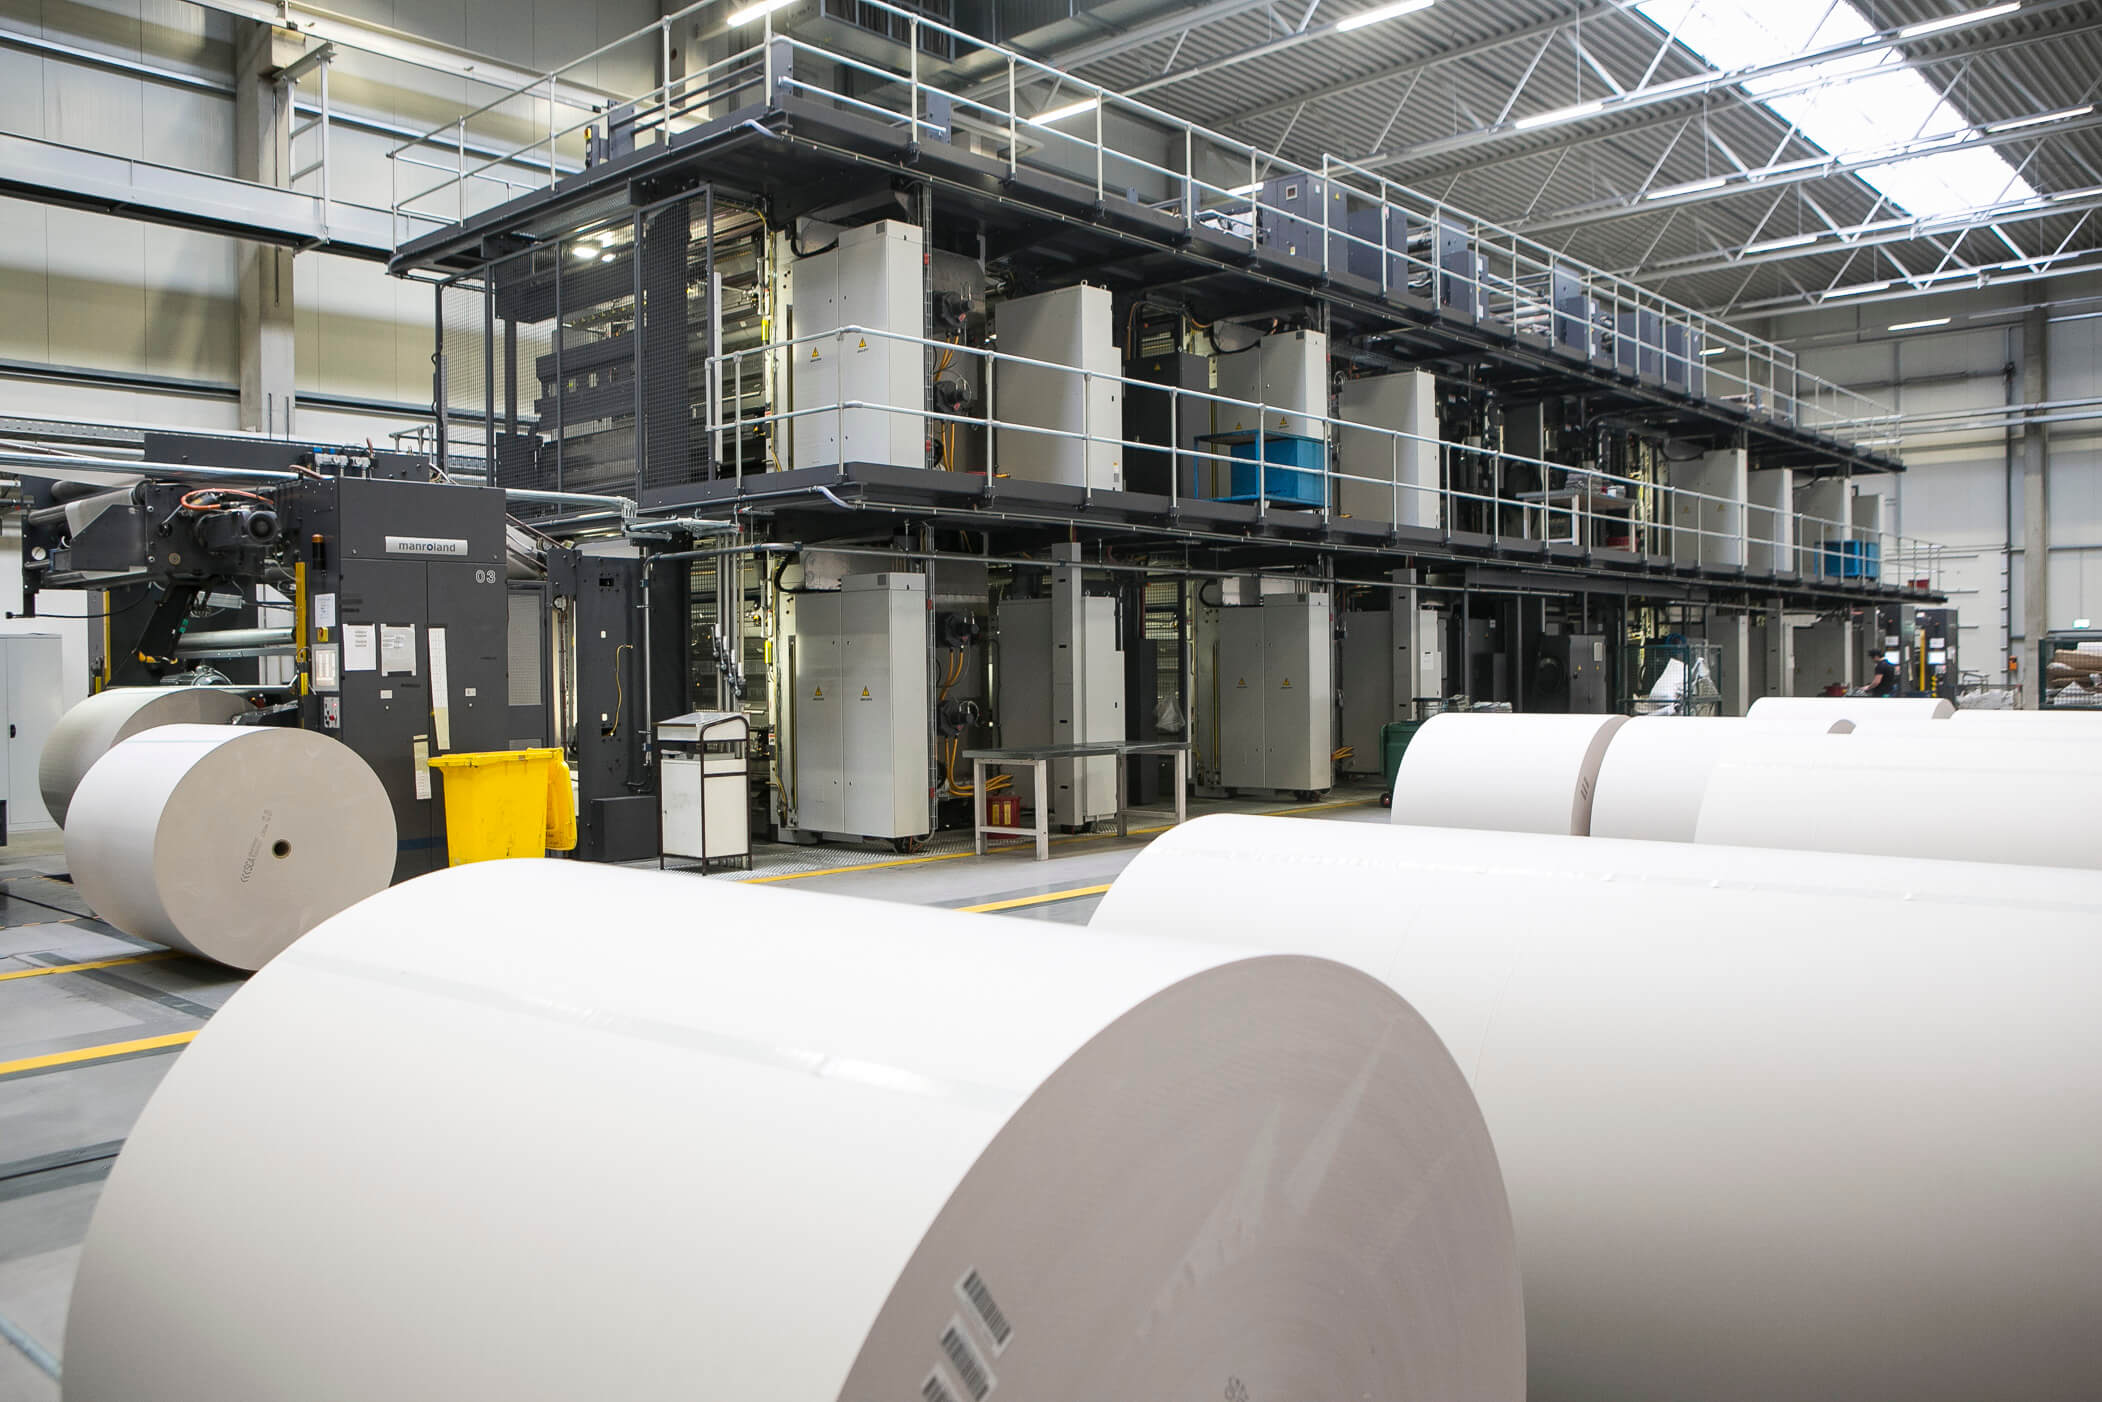 Newsprint on large rolls in the printing house